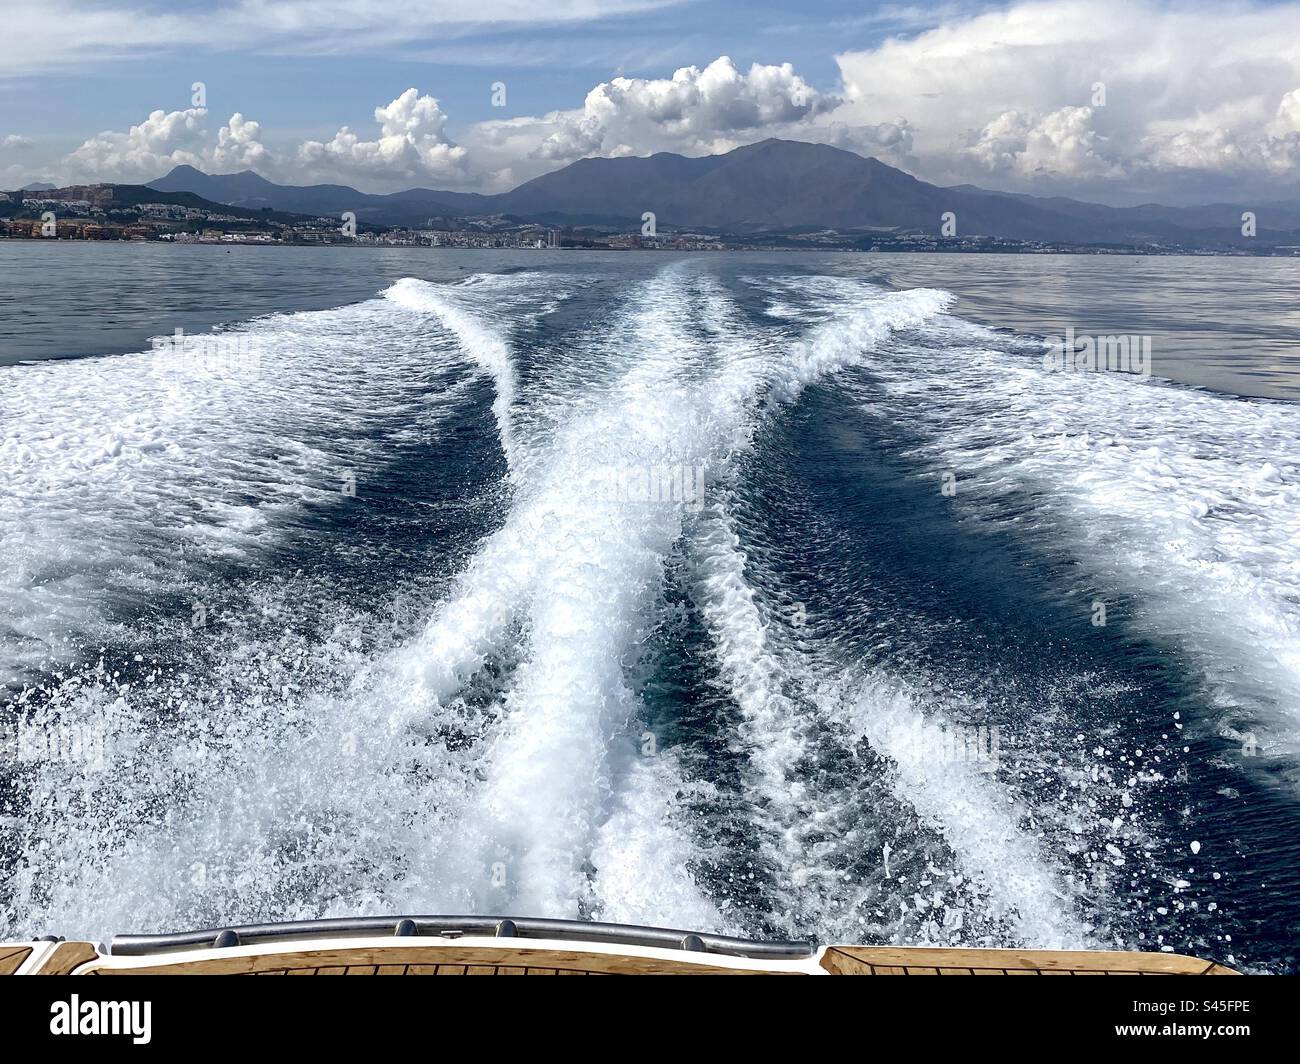 https://c8.alamy.com/comp/S45FPE/the-impressive-wake-of-a-fast-speed-boat-with-the-coastline-of-spain-in-the-distance-S45FPE.jpg